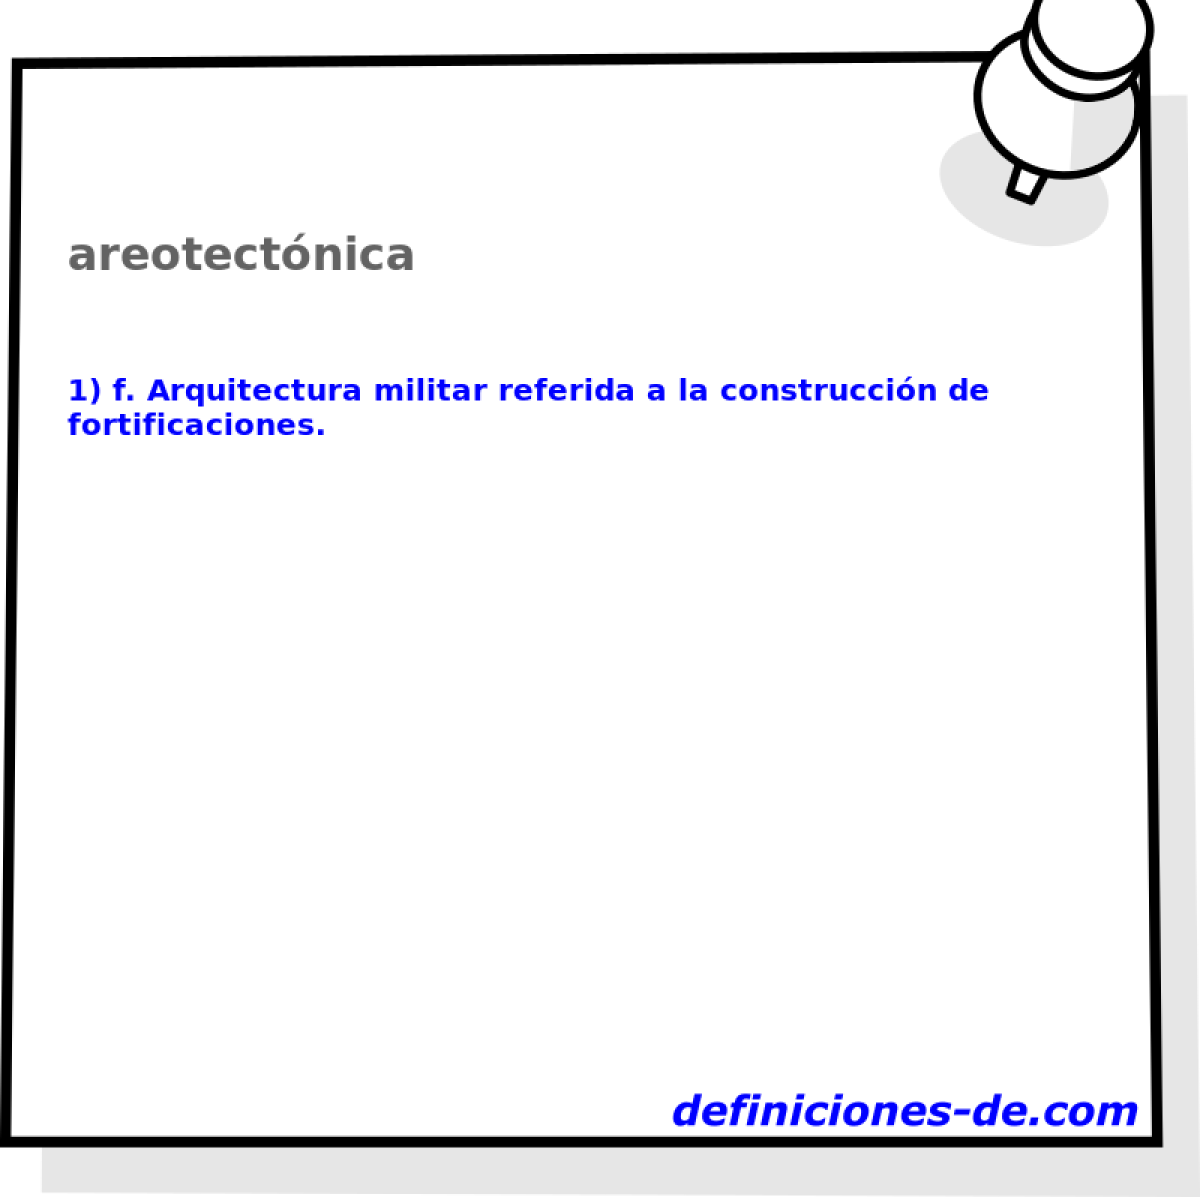 areotectnica 